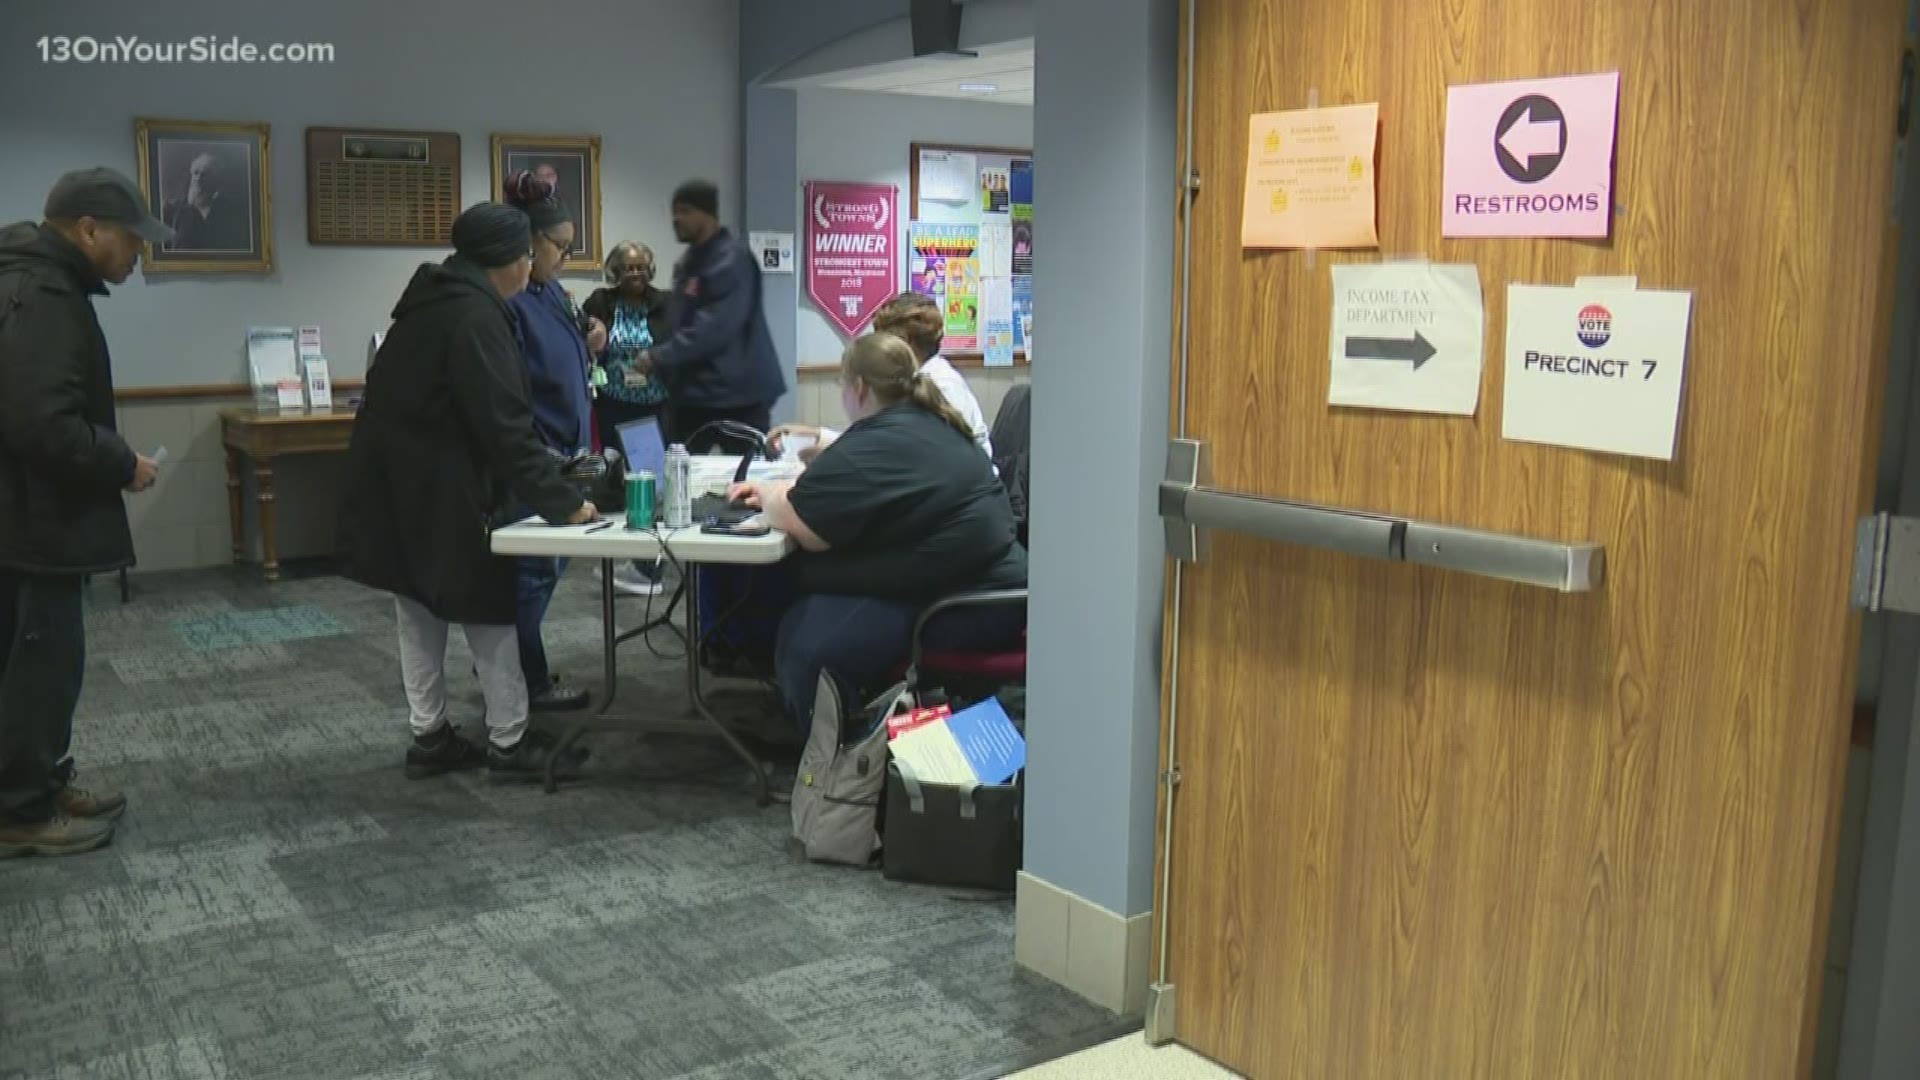 13 ON YOUR SIDE's Lakeshore reporter Jon Mills was live at city hall with all the details about how Muskegon County Clerk's office spent the morning preparing.